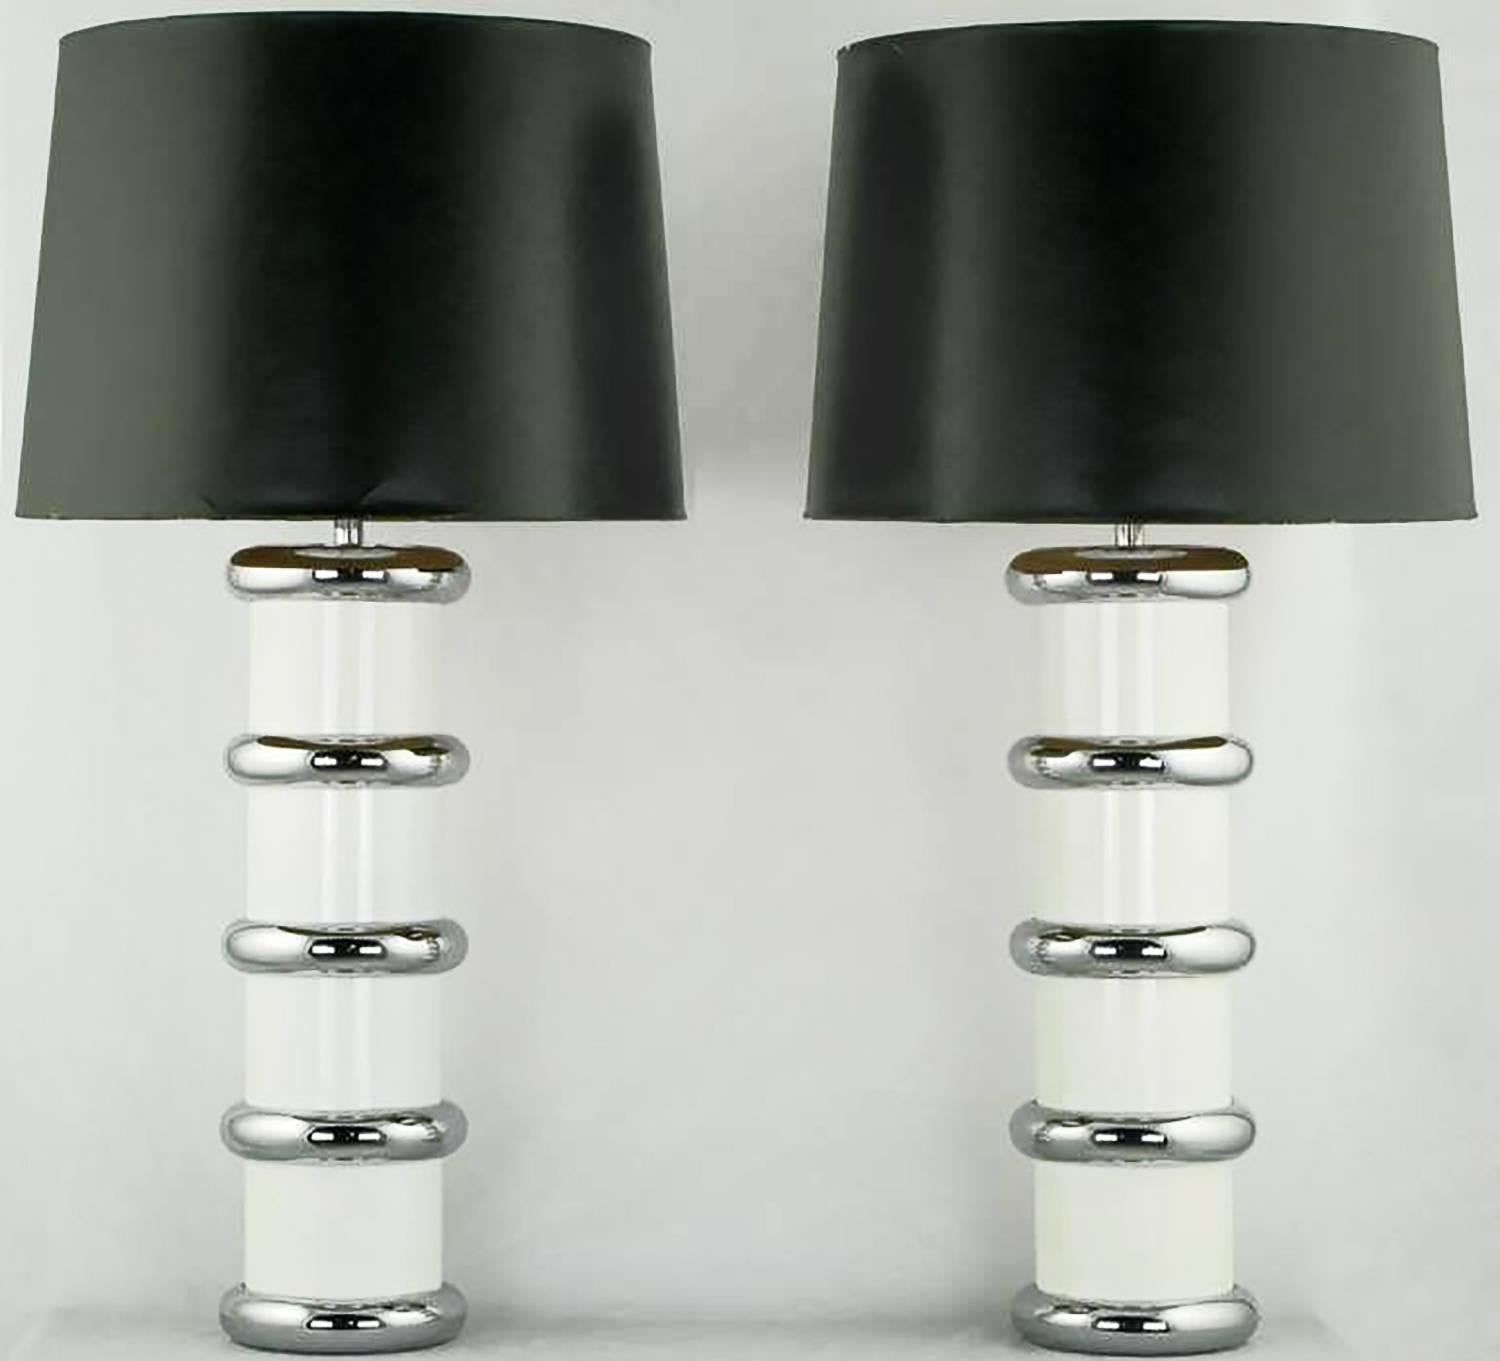 Pair of tubular form table lamps in white enameled steel with chromed steel cuff rings, stem, socket and harp. From the mutual sunset lamp company; a now defunct lamp company that featured designs by Gilbert Rhode, among others. Sold sans shades.